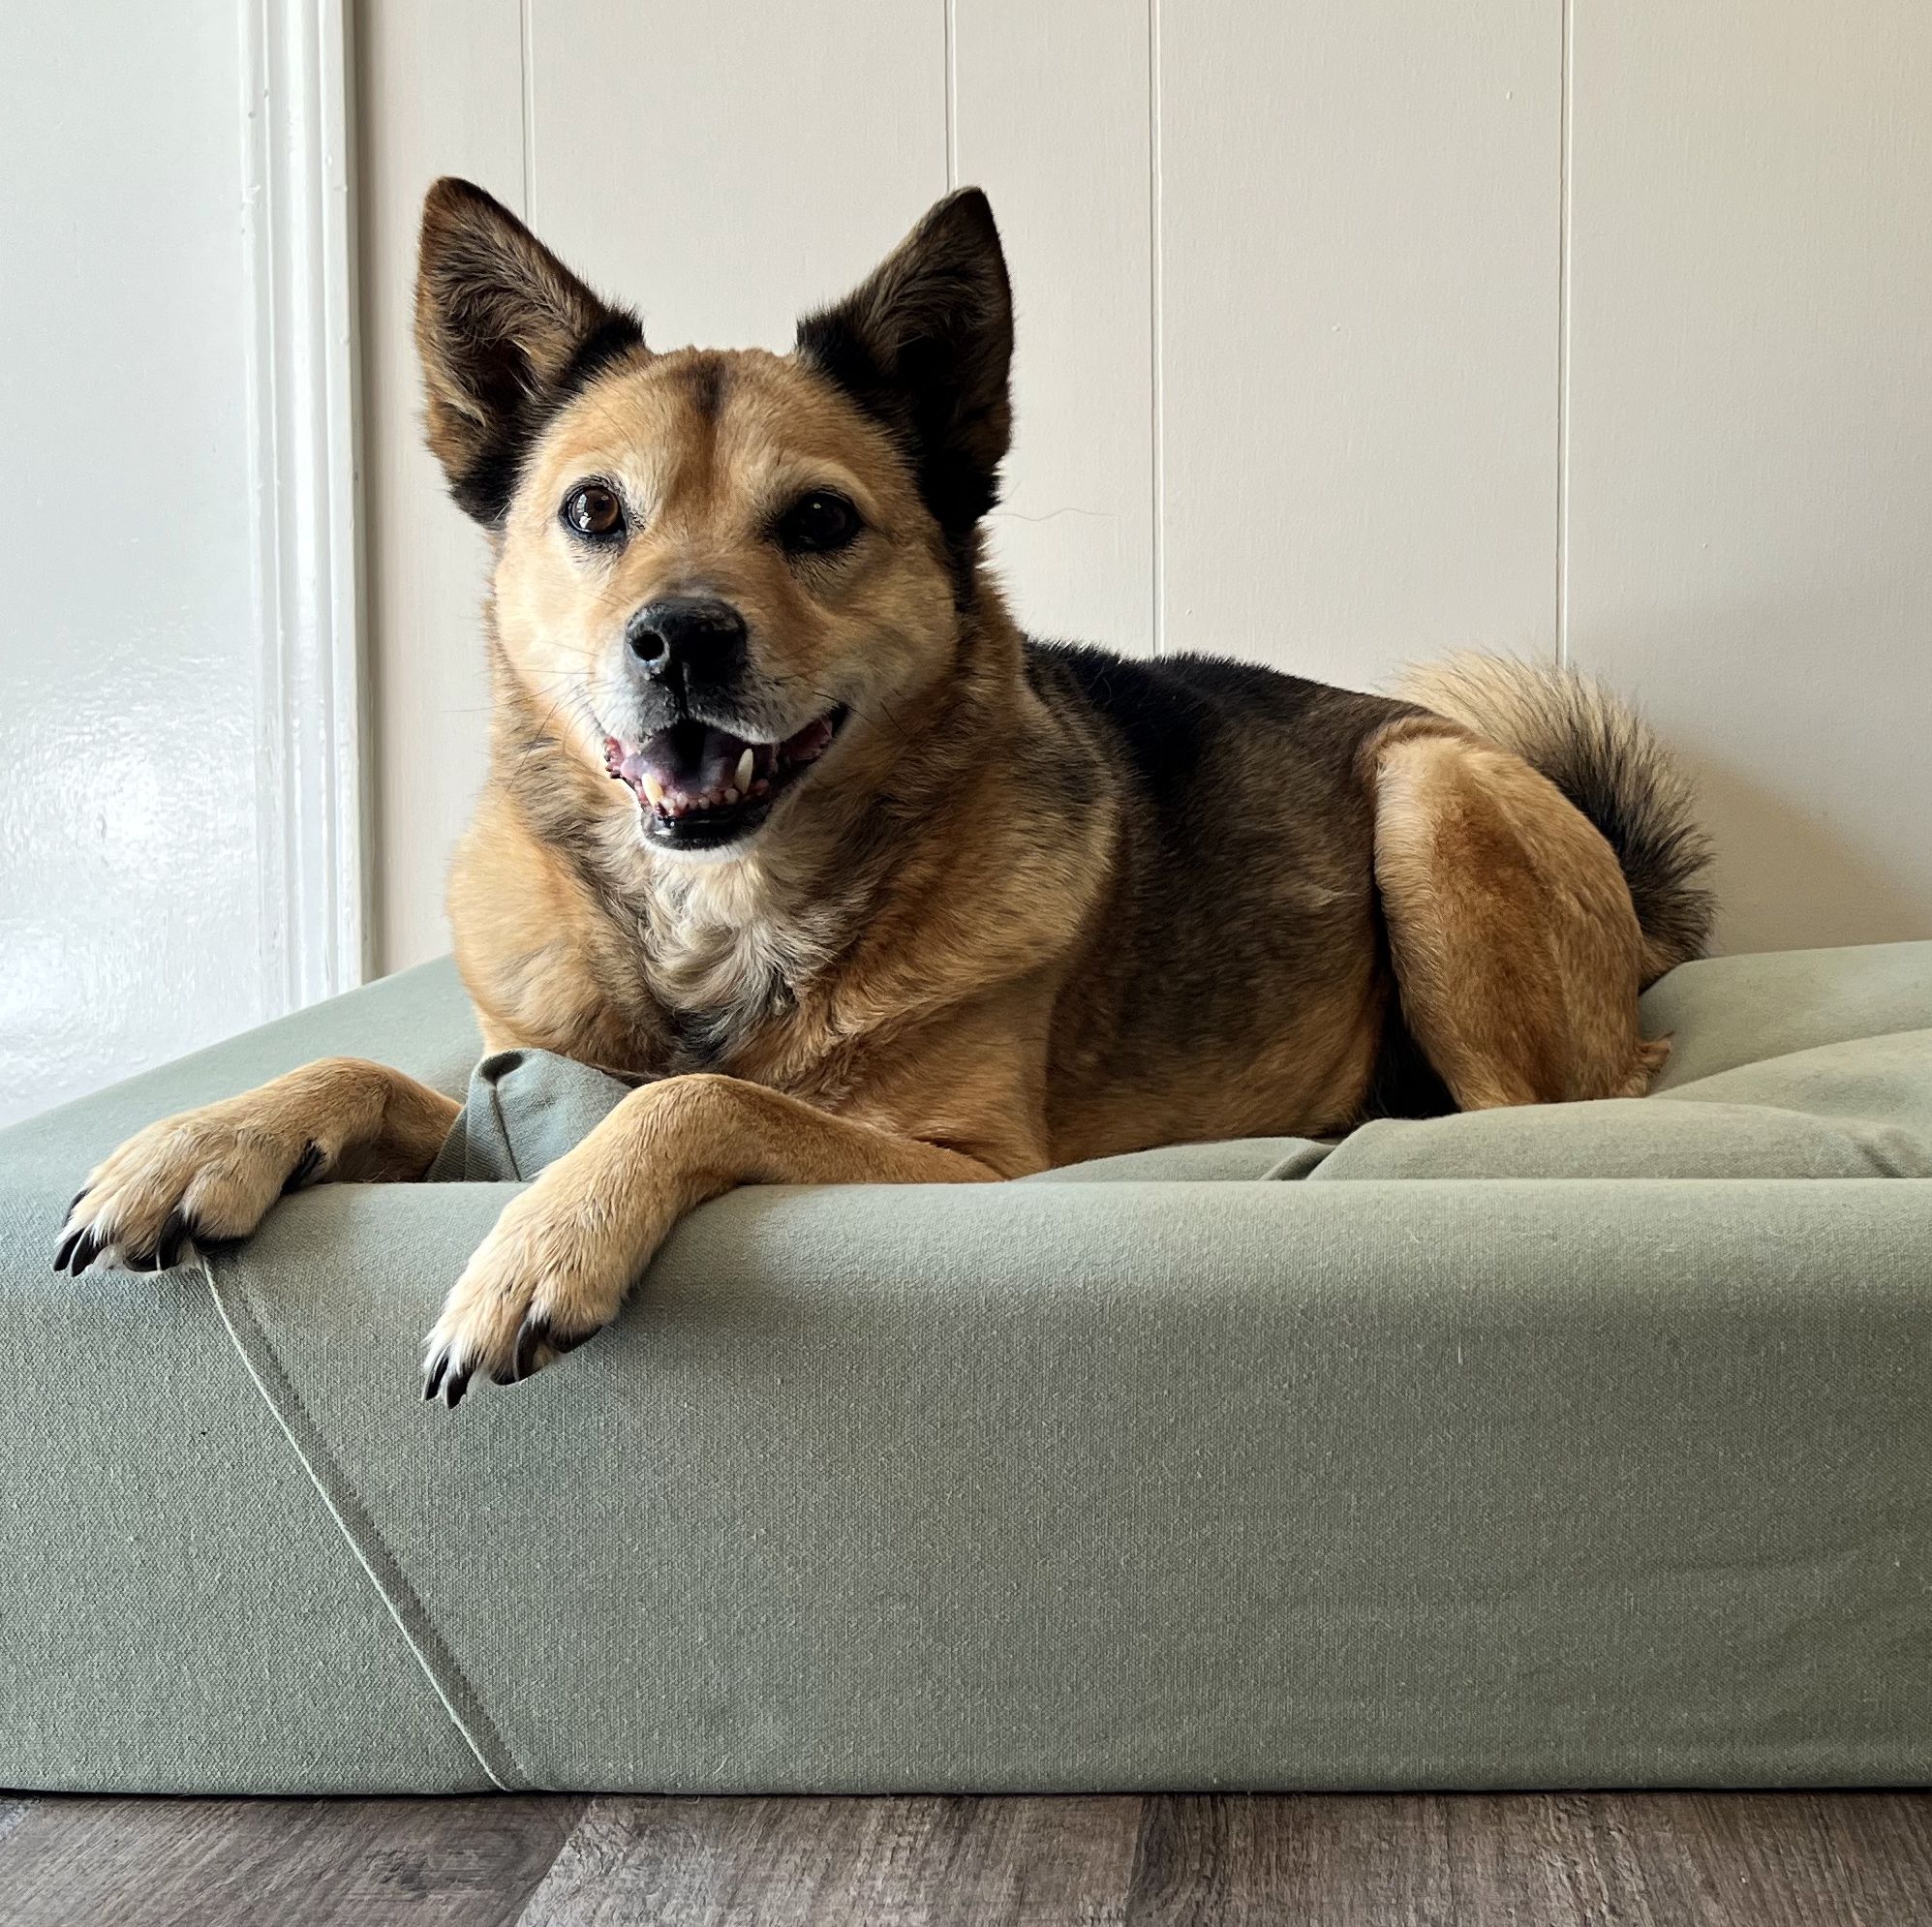 We Tested Tons of Dog Beds and These Made the Cut as the Best